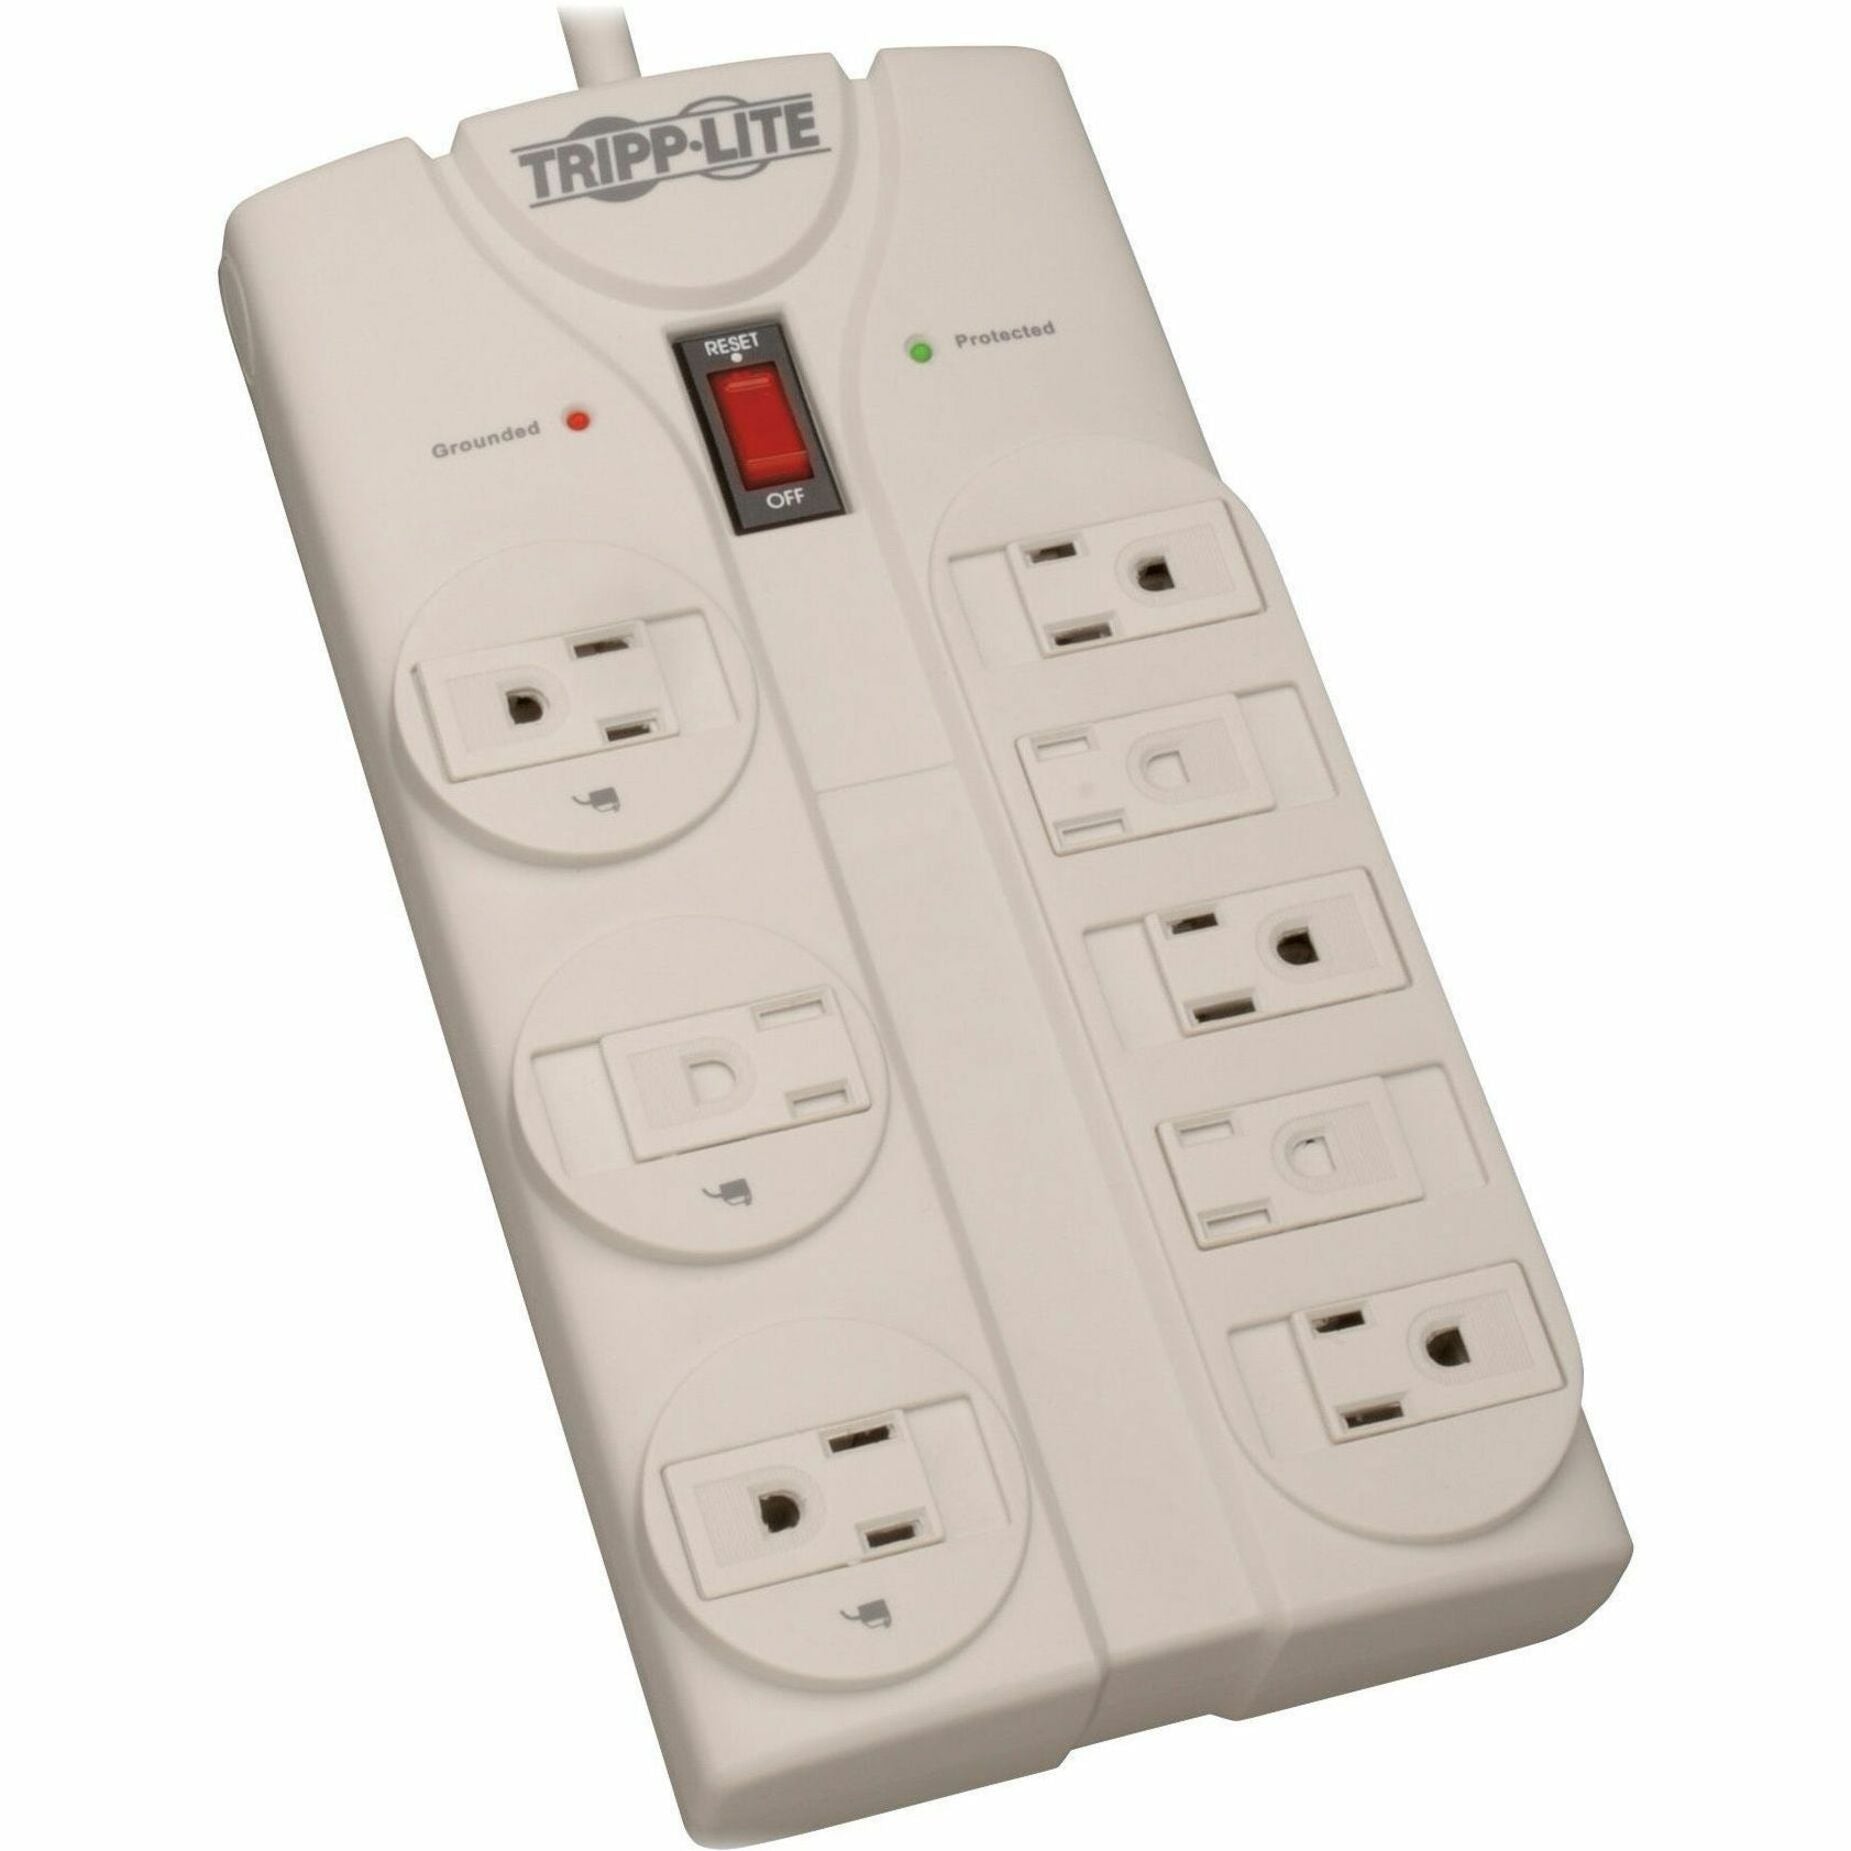 Tripp Lite TLP808 Protect It! 1440 Joule 8-Outlet Surge Protector, 8' Cord, Gray